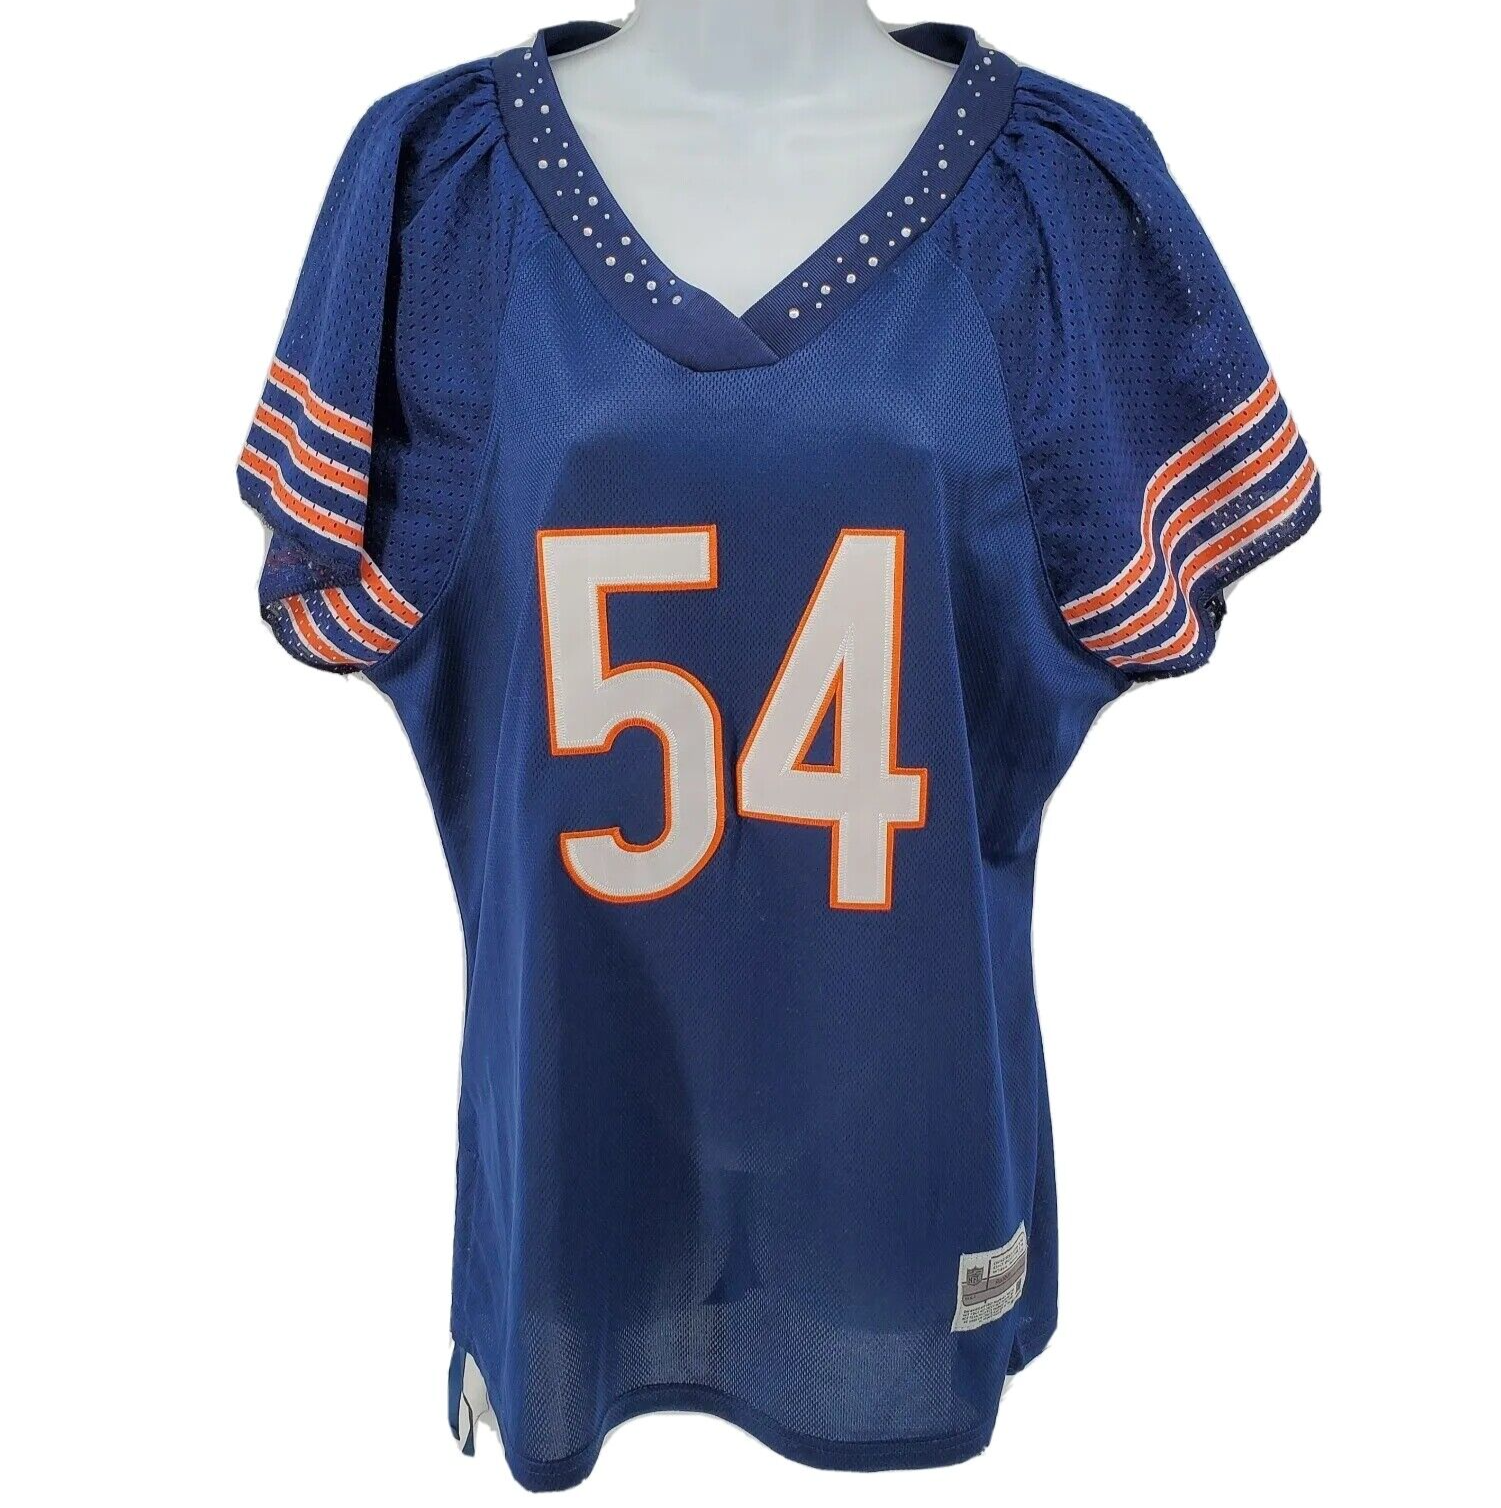 Primary image for Chicago Bears Brian Urlacher Reebok Jersey Women's XXL Bedazzled Navy Blue